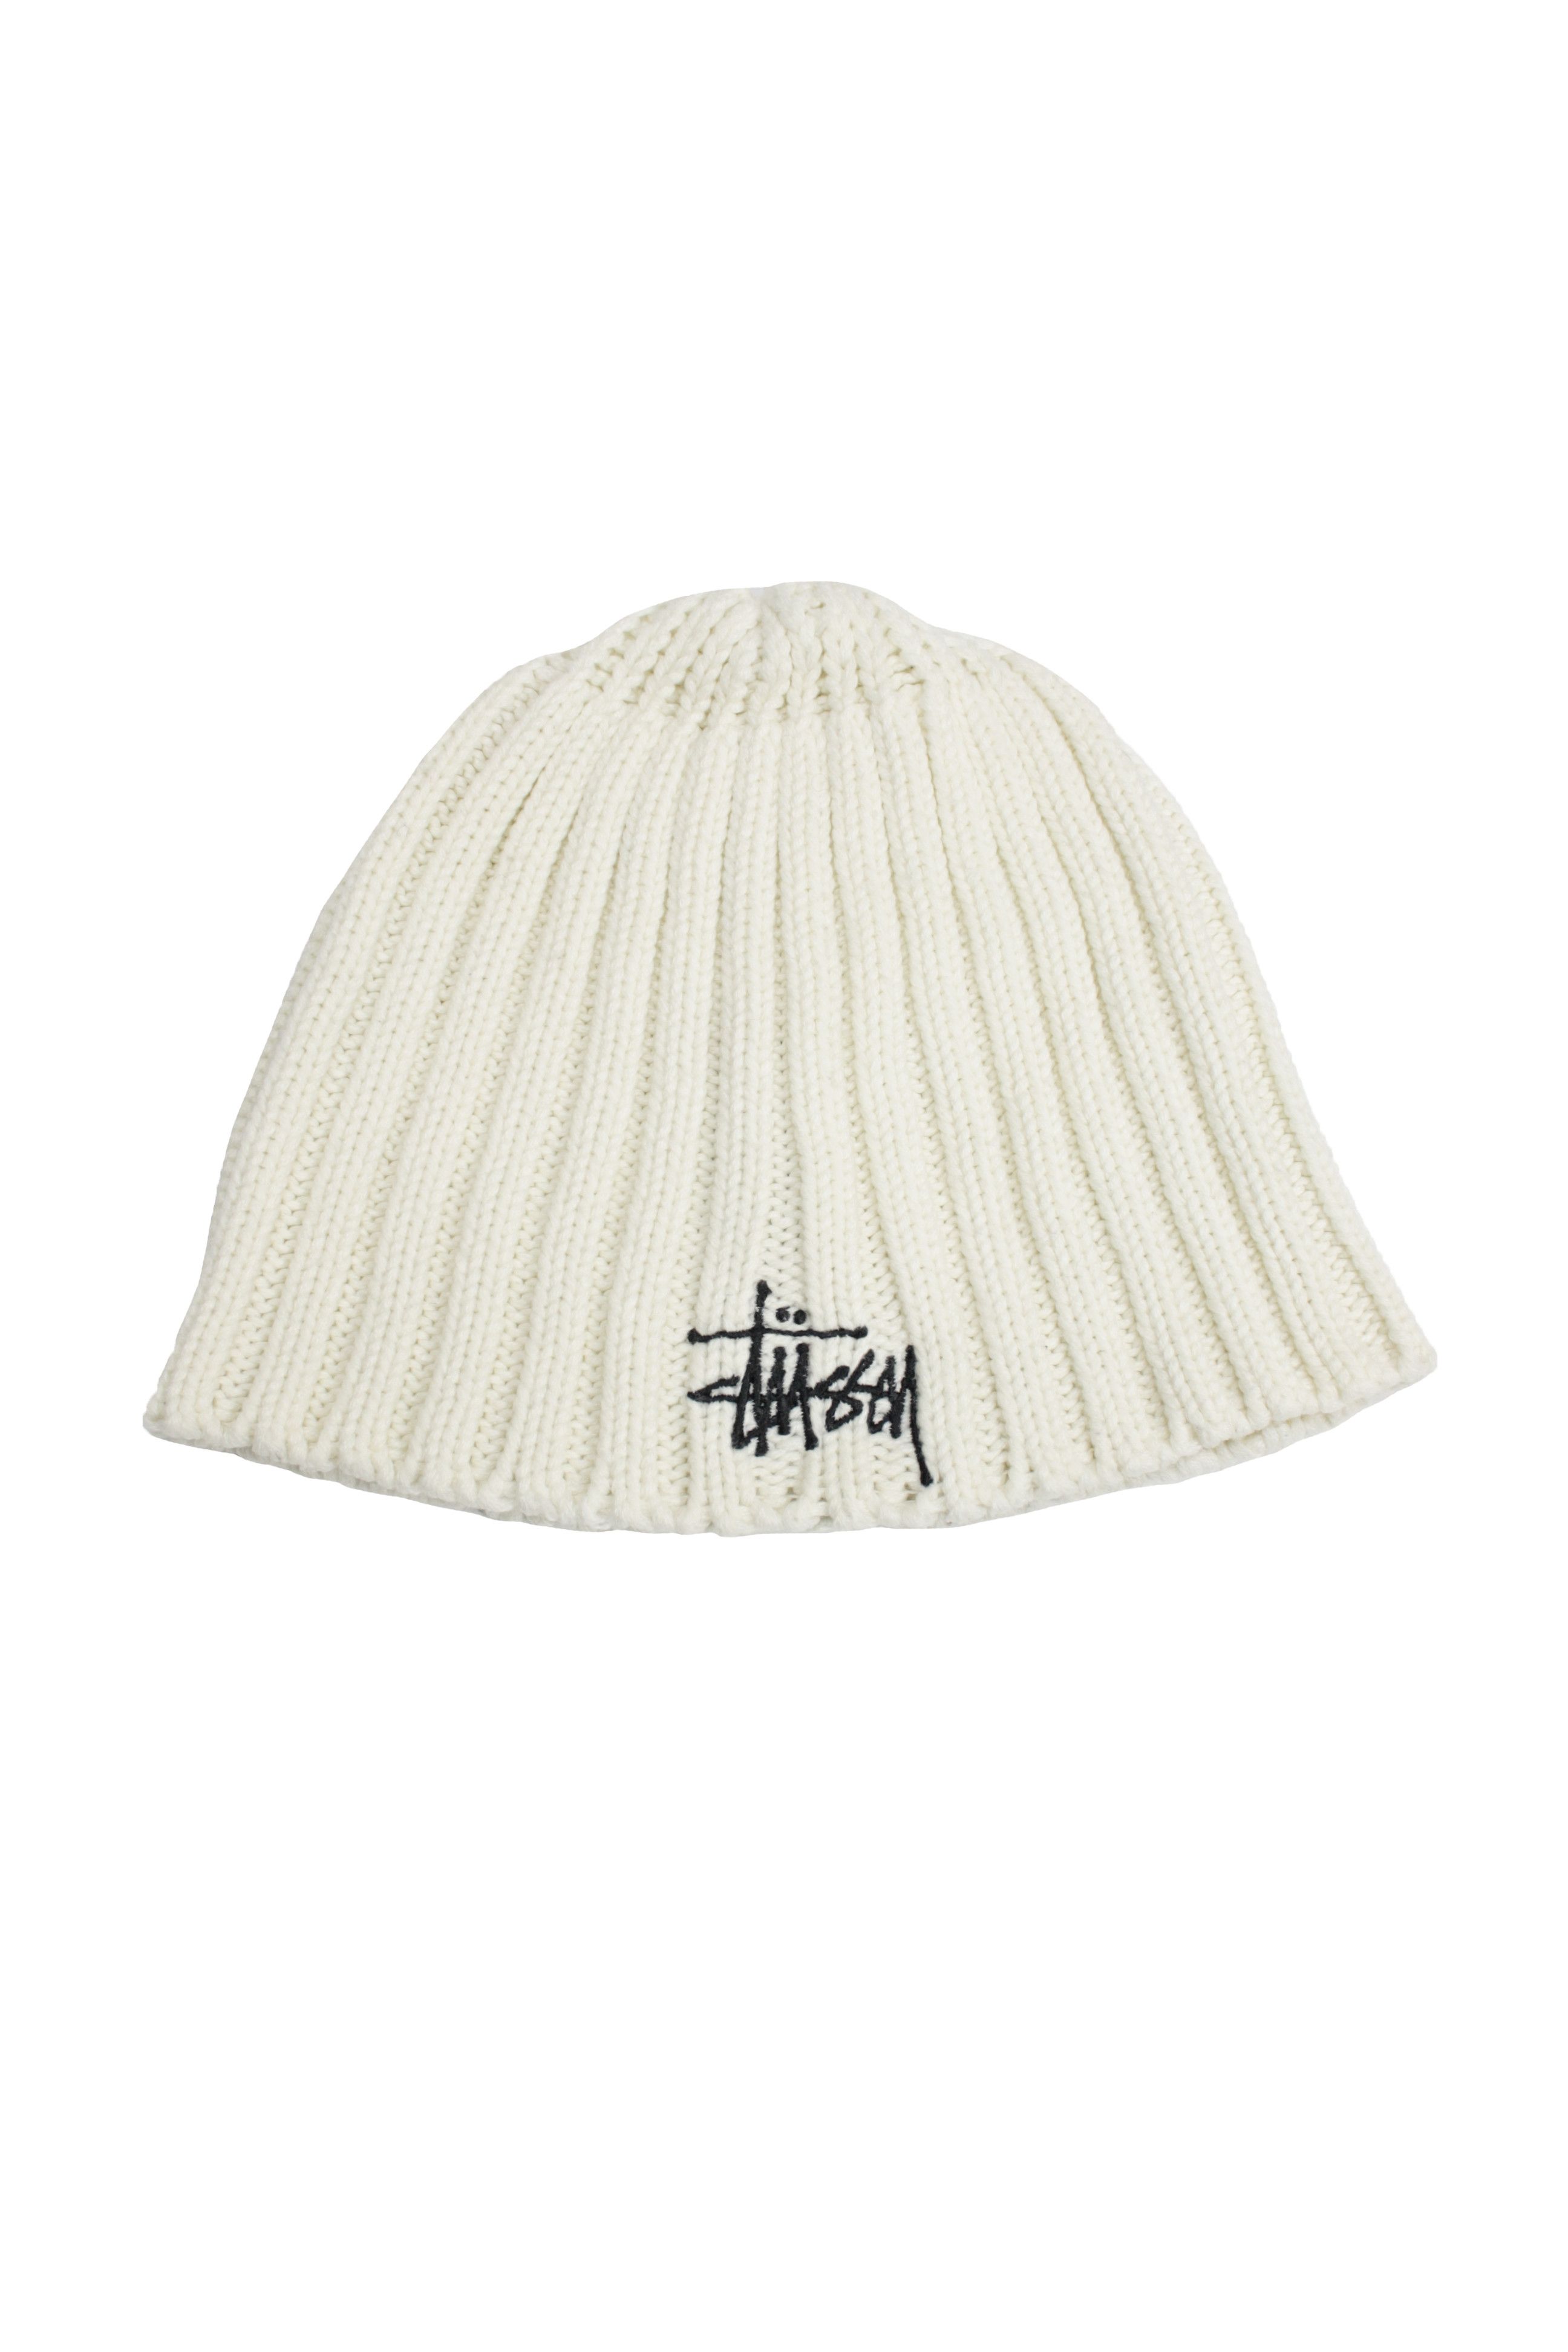 Pre-owned Stussy X Vintage Stussy Hats 90's Vintage Knitted Cotton Skully Beanie In Ivory